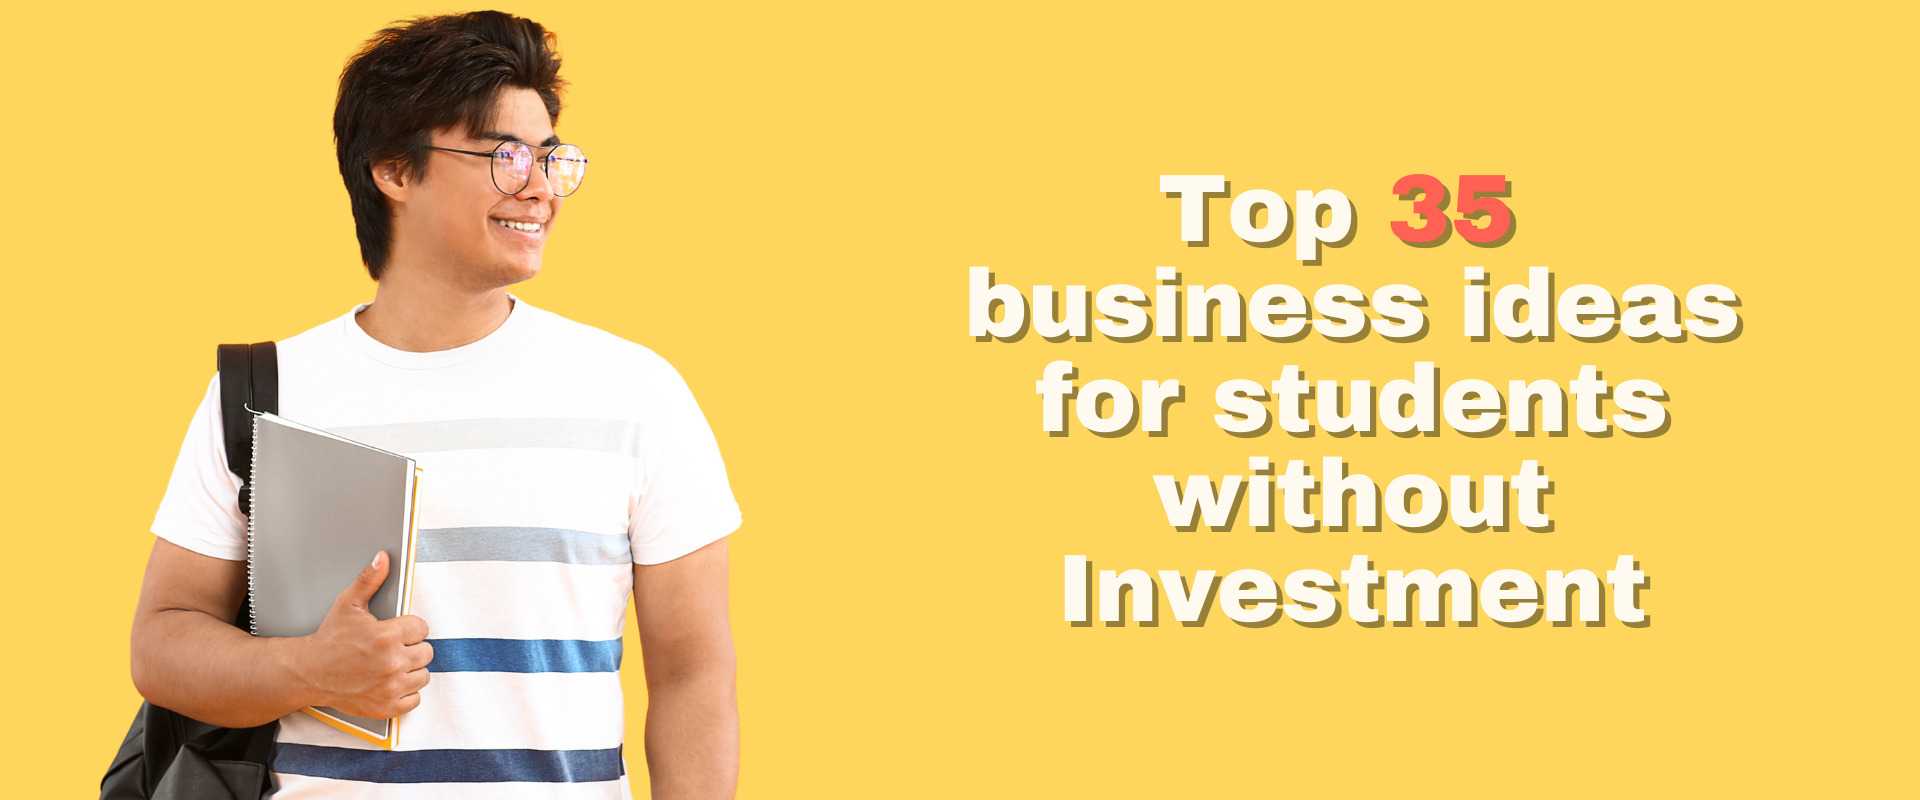 Top 35 business ideas for students without Investment